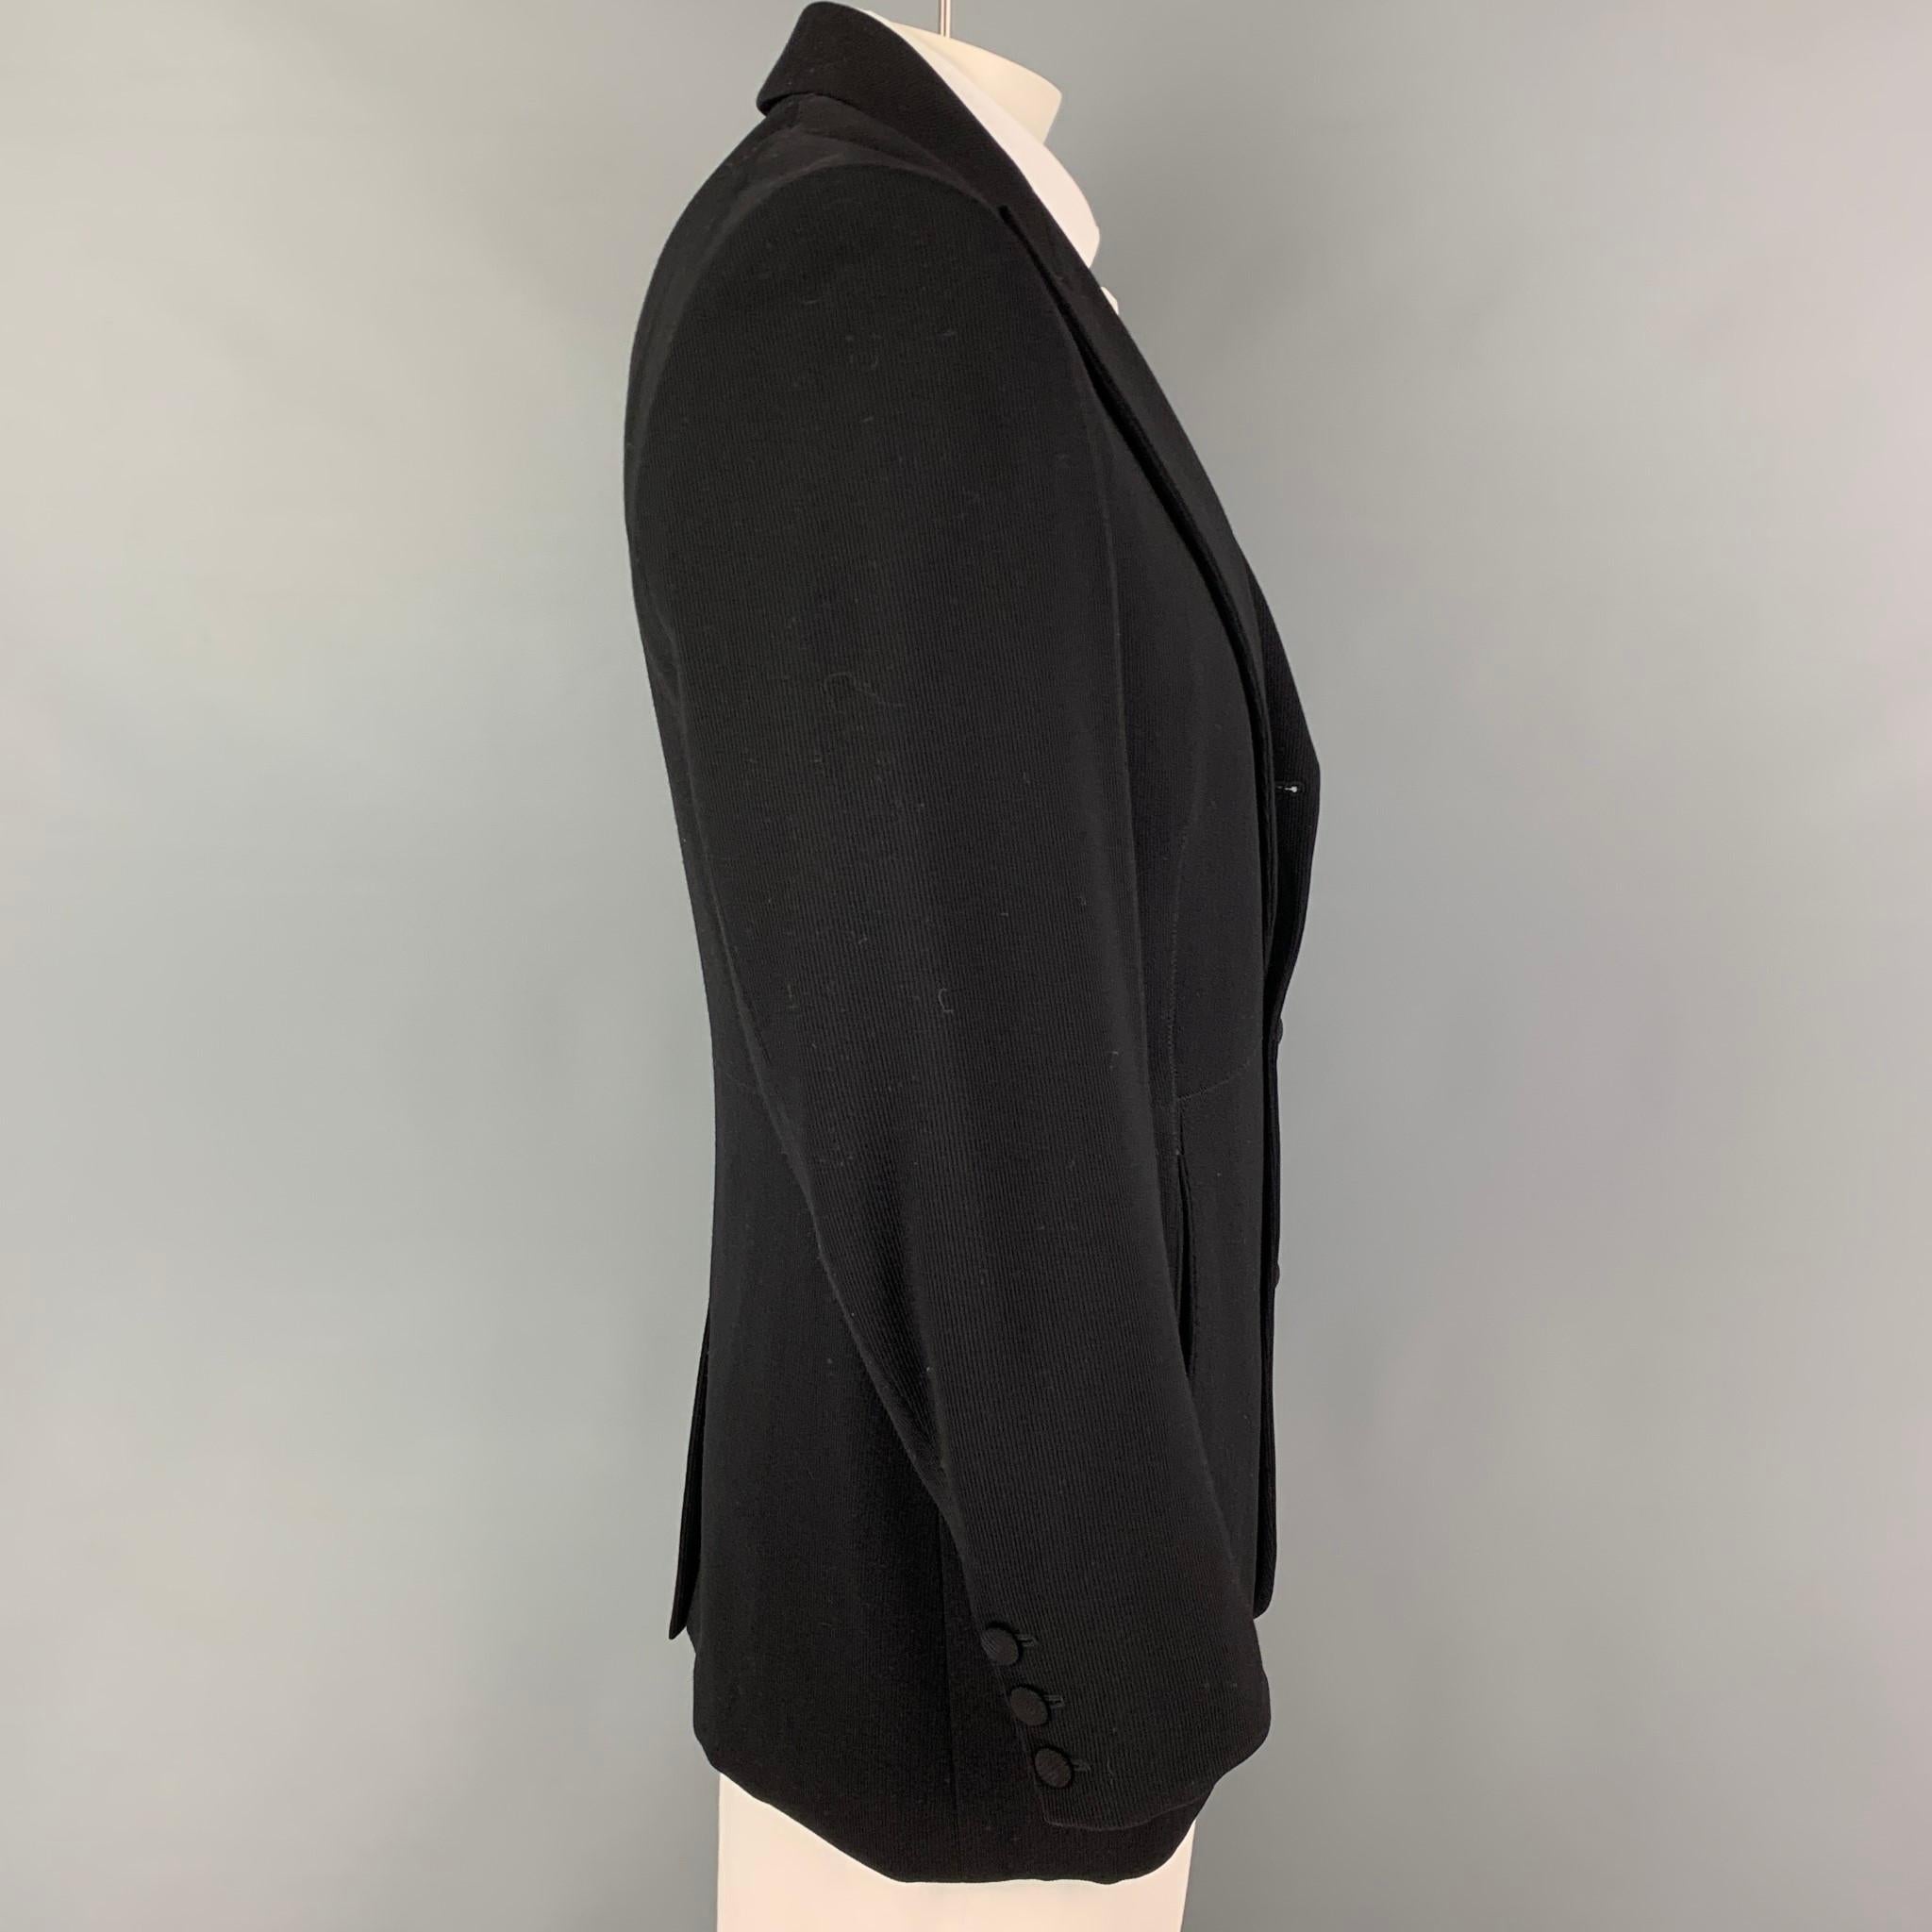 JEAN PAUL GAULTIER HOMME sport coat comes in a black material with a full stripe liner featuring a peak lapel, slit pockets, single back vent, and a three button closure. Made in Italy. 

Very Good Pre-Owned Condition. Light wear at interior.